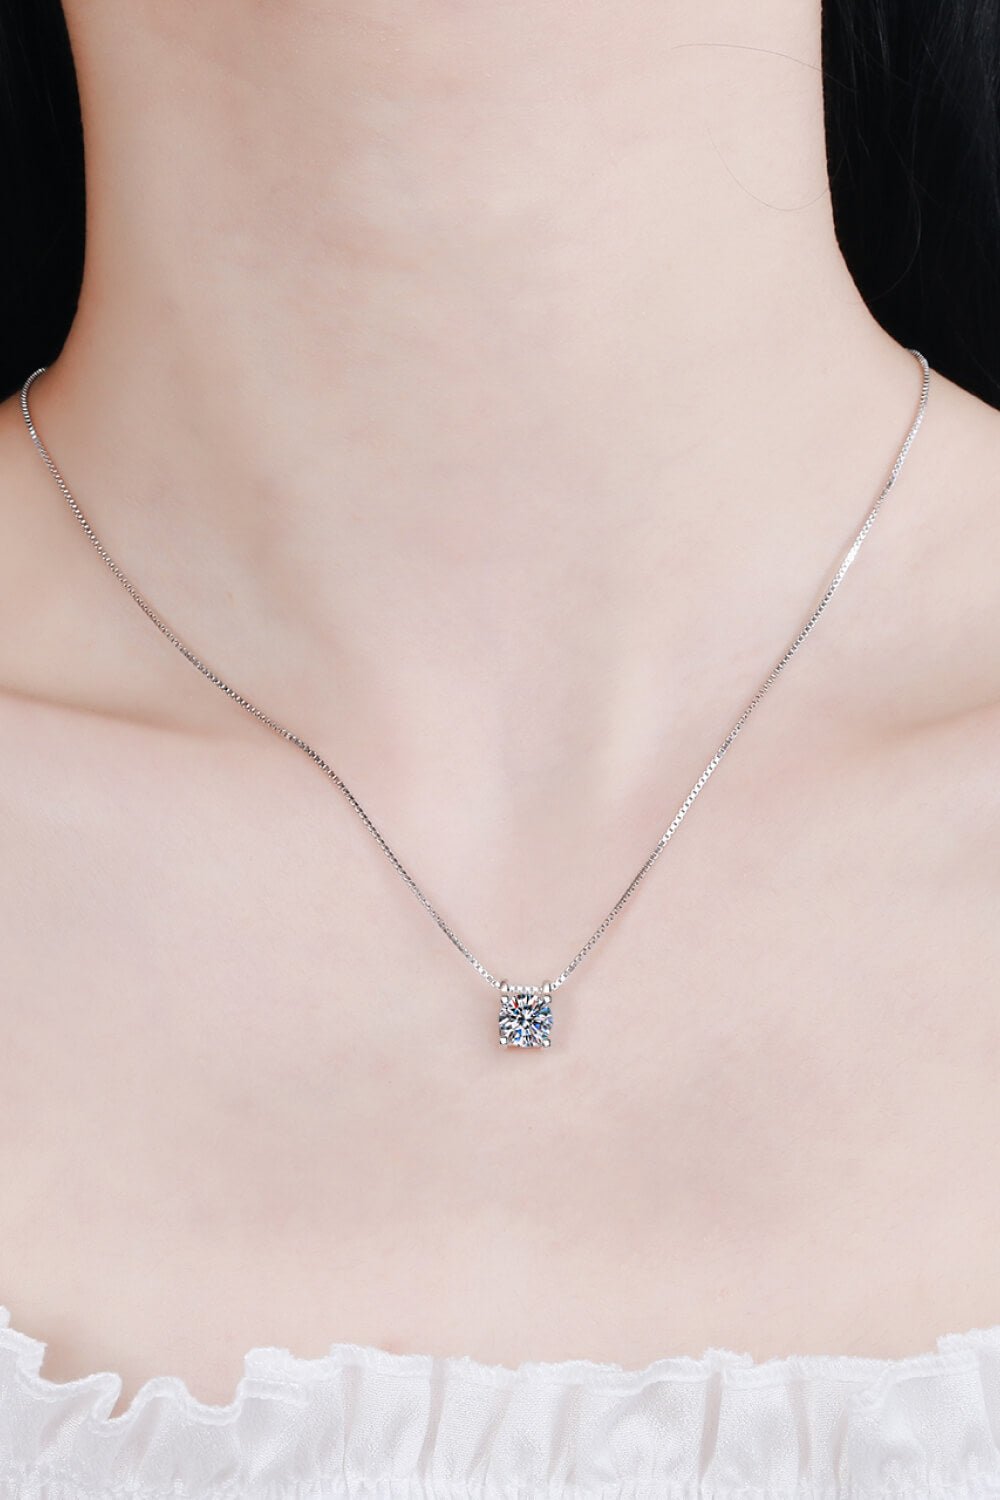 1 Carat Moissanite 925 Sterling Silver Chain Necklace - Shah S. Sahota